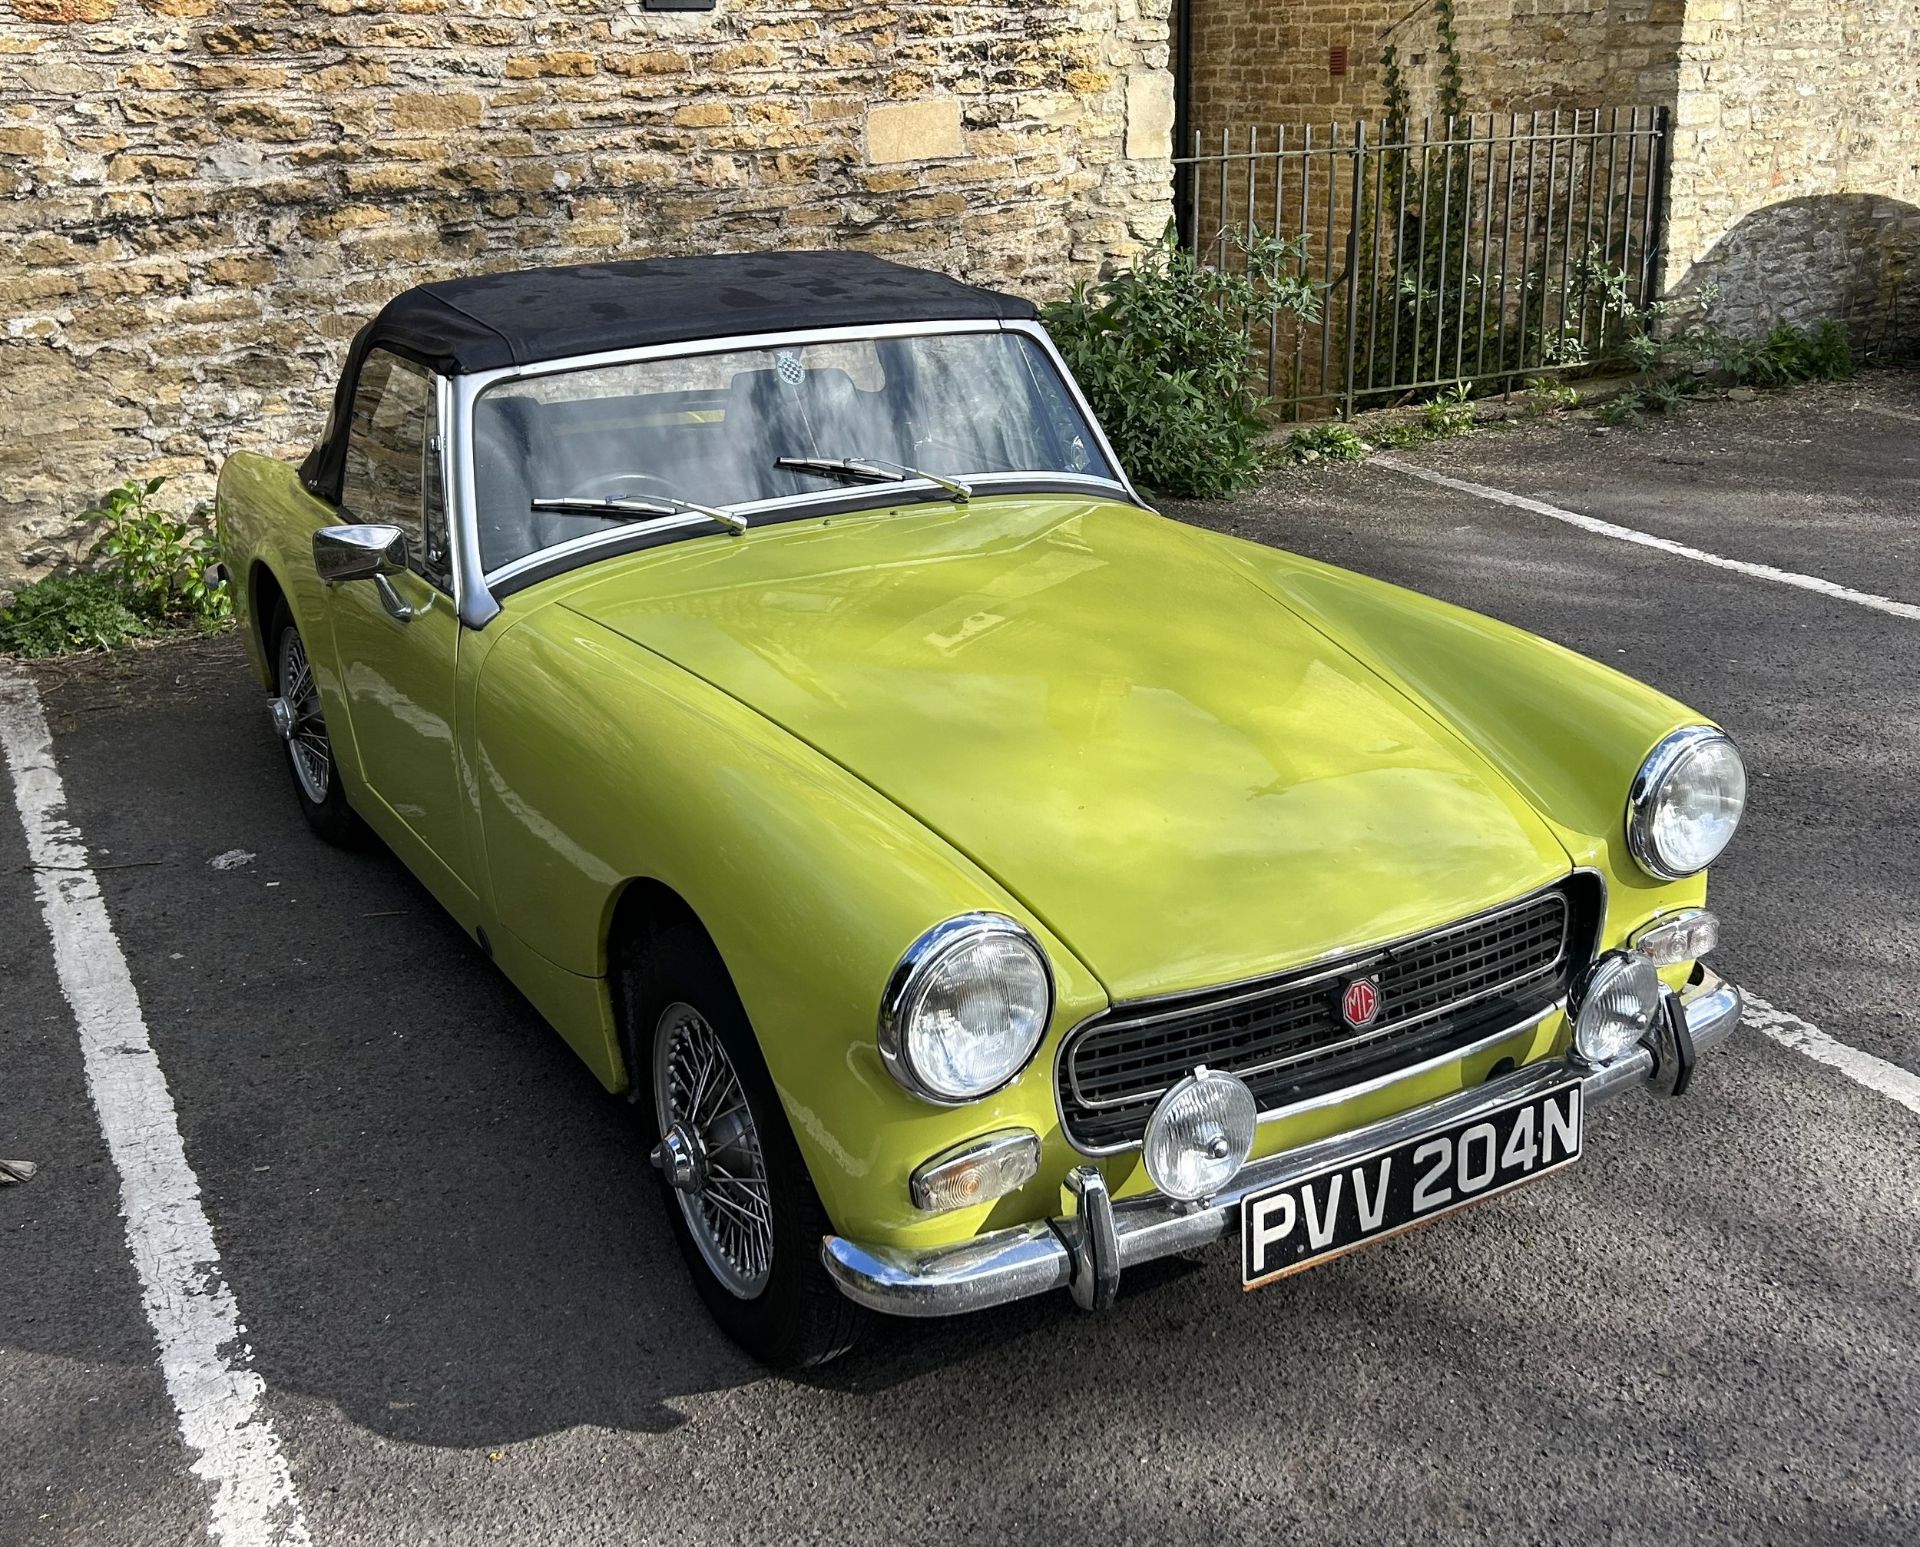 1974 MG MIDGET Registration Number: PVV 294N Chassis Number: G-AN5/147935-G Recorded Mileage: c.16, - Image 3 of 13